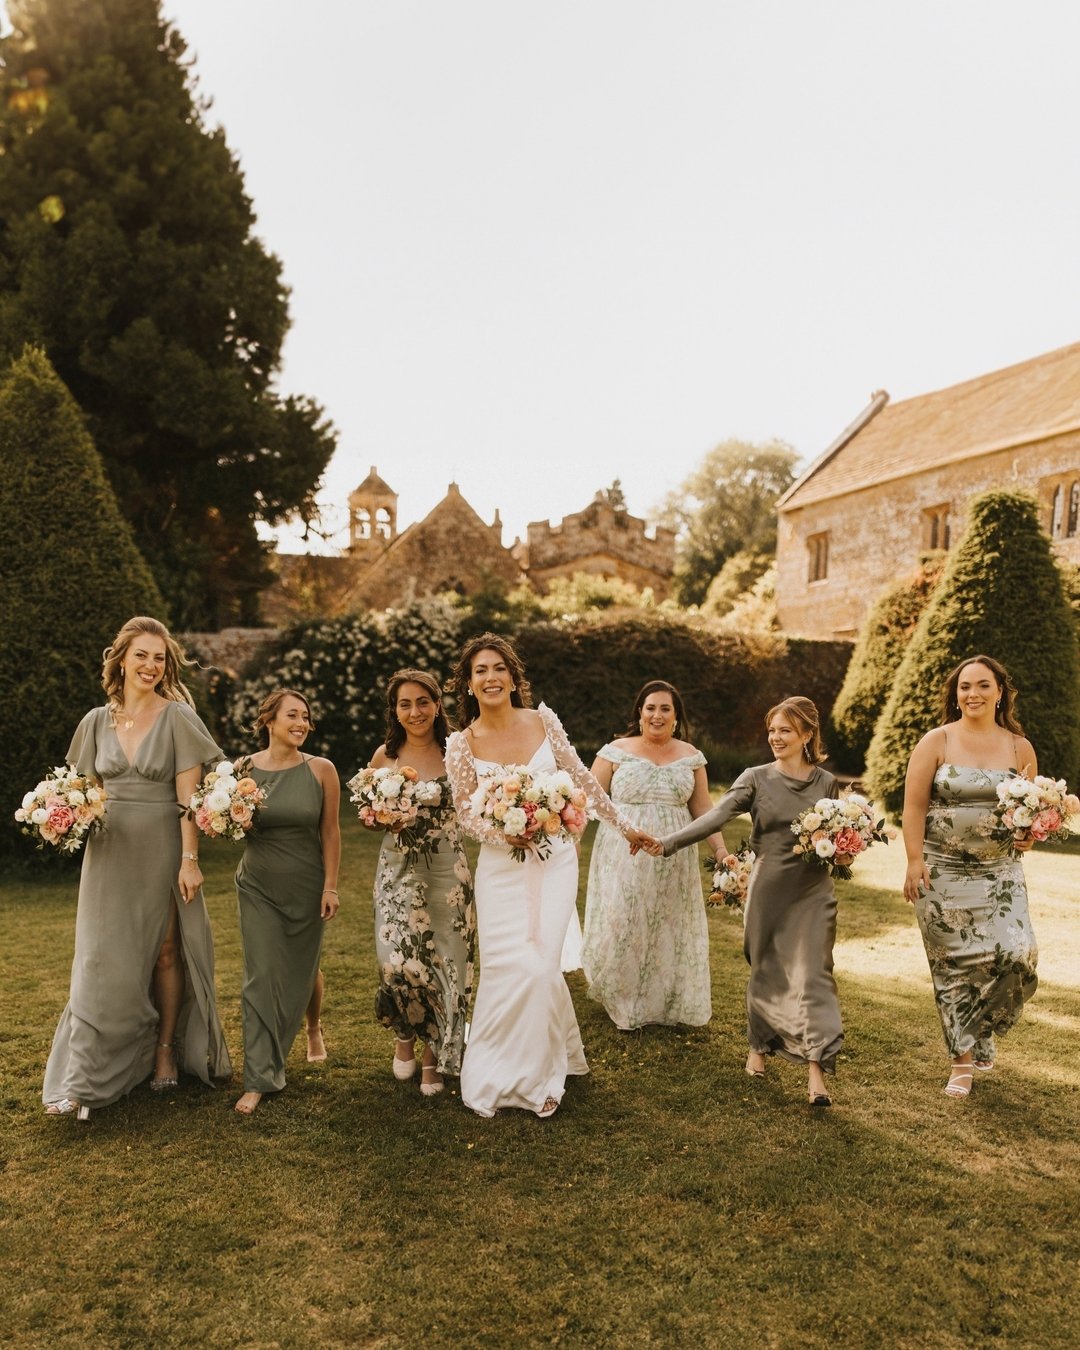 Let's talk bridesmaid bouquets 💐

Keep the bridal party cohesive with smaller versions of your stunning bouquet! Here's some top tips on picking the perfect blooms for your bridal party. 

🌈 Colour Coordination - Whether it's pastels, bold hues, or